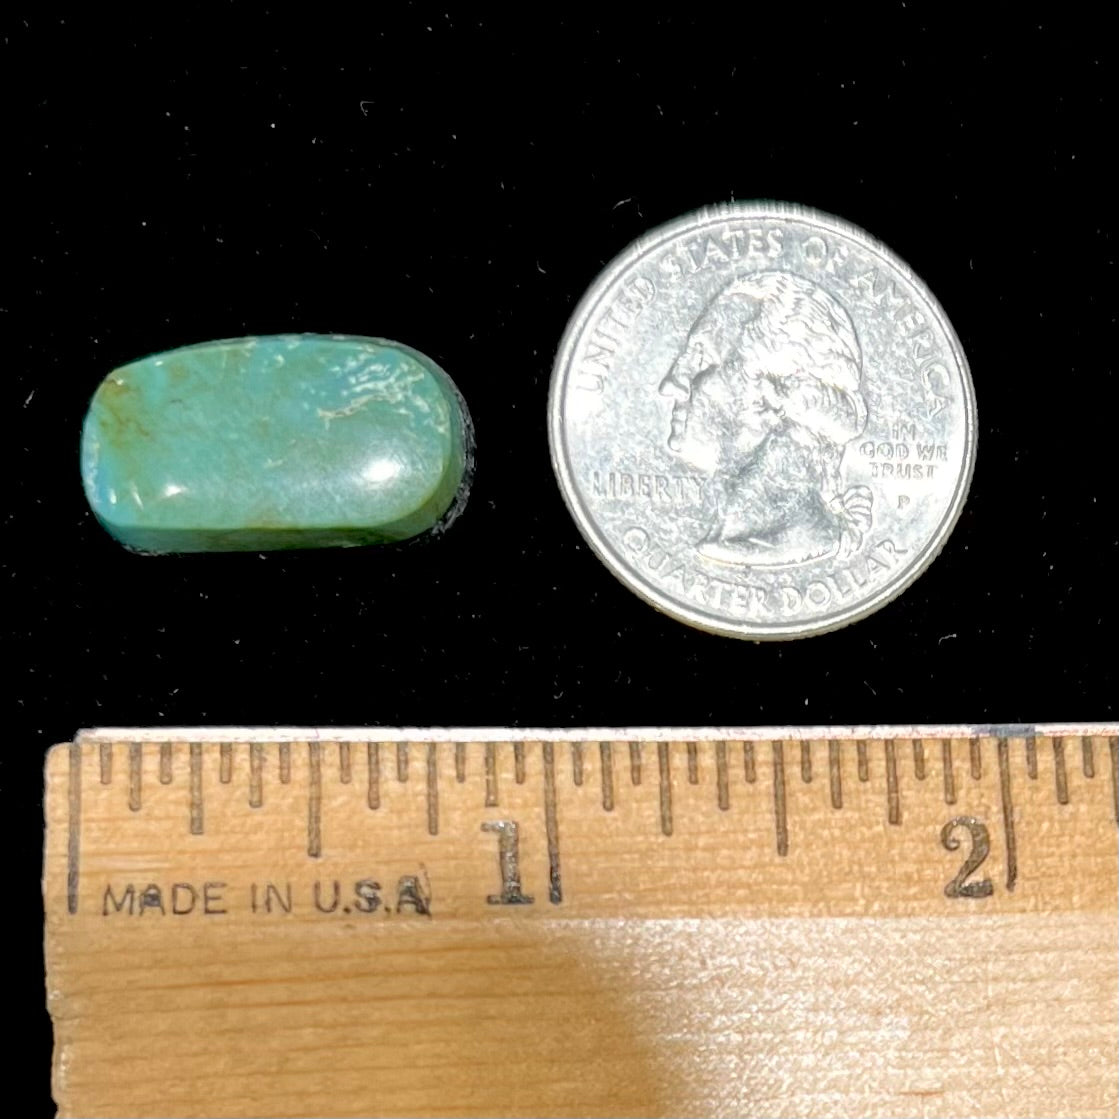 A loose, green Royston turquoise stone from Nevada.